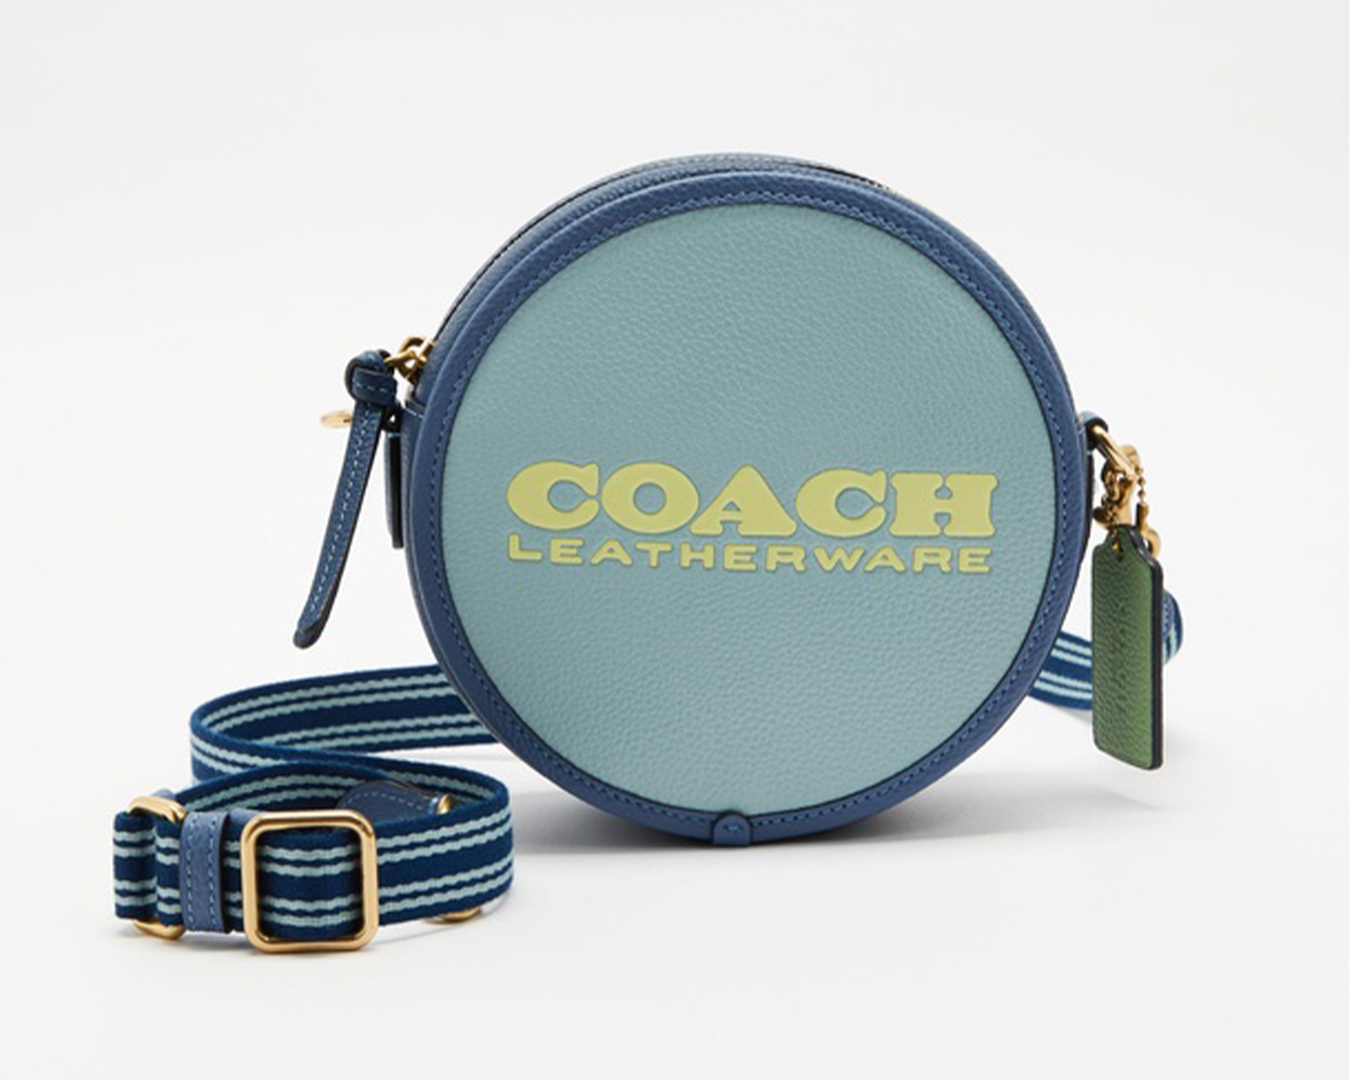 A blue circular handbag with a striped strap and 'Coach leatherware' written in yellow